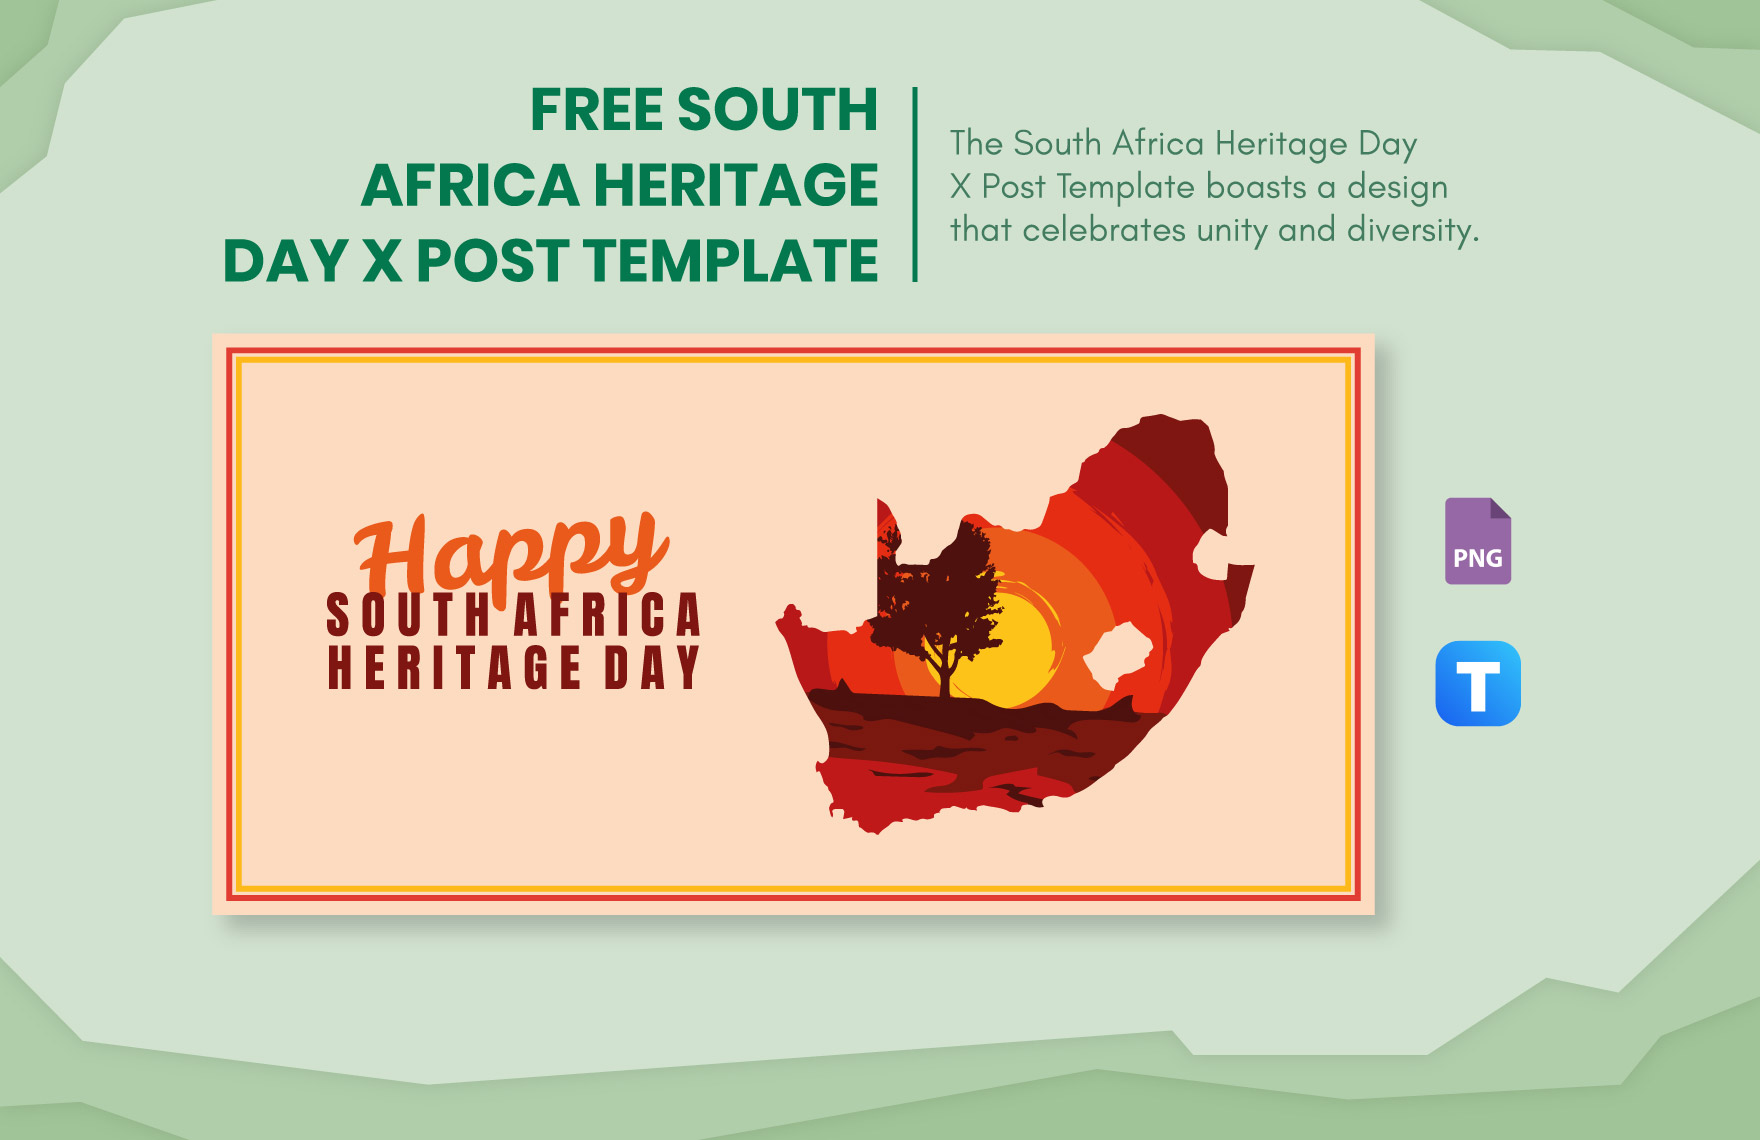 Free South Africa Heritage Day X Post Template in PNG